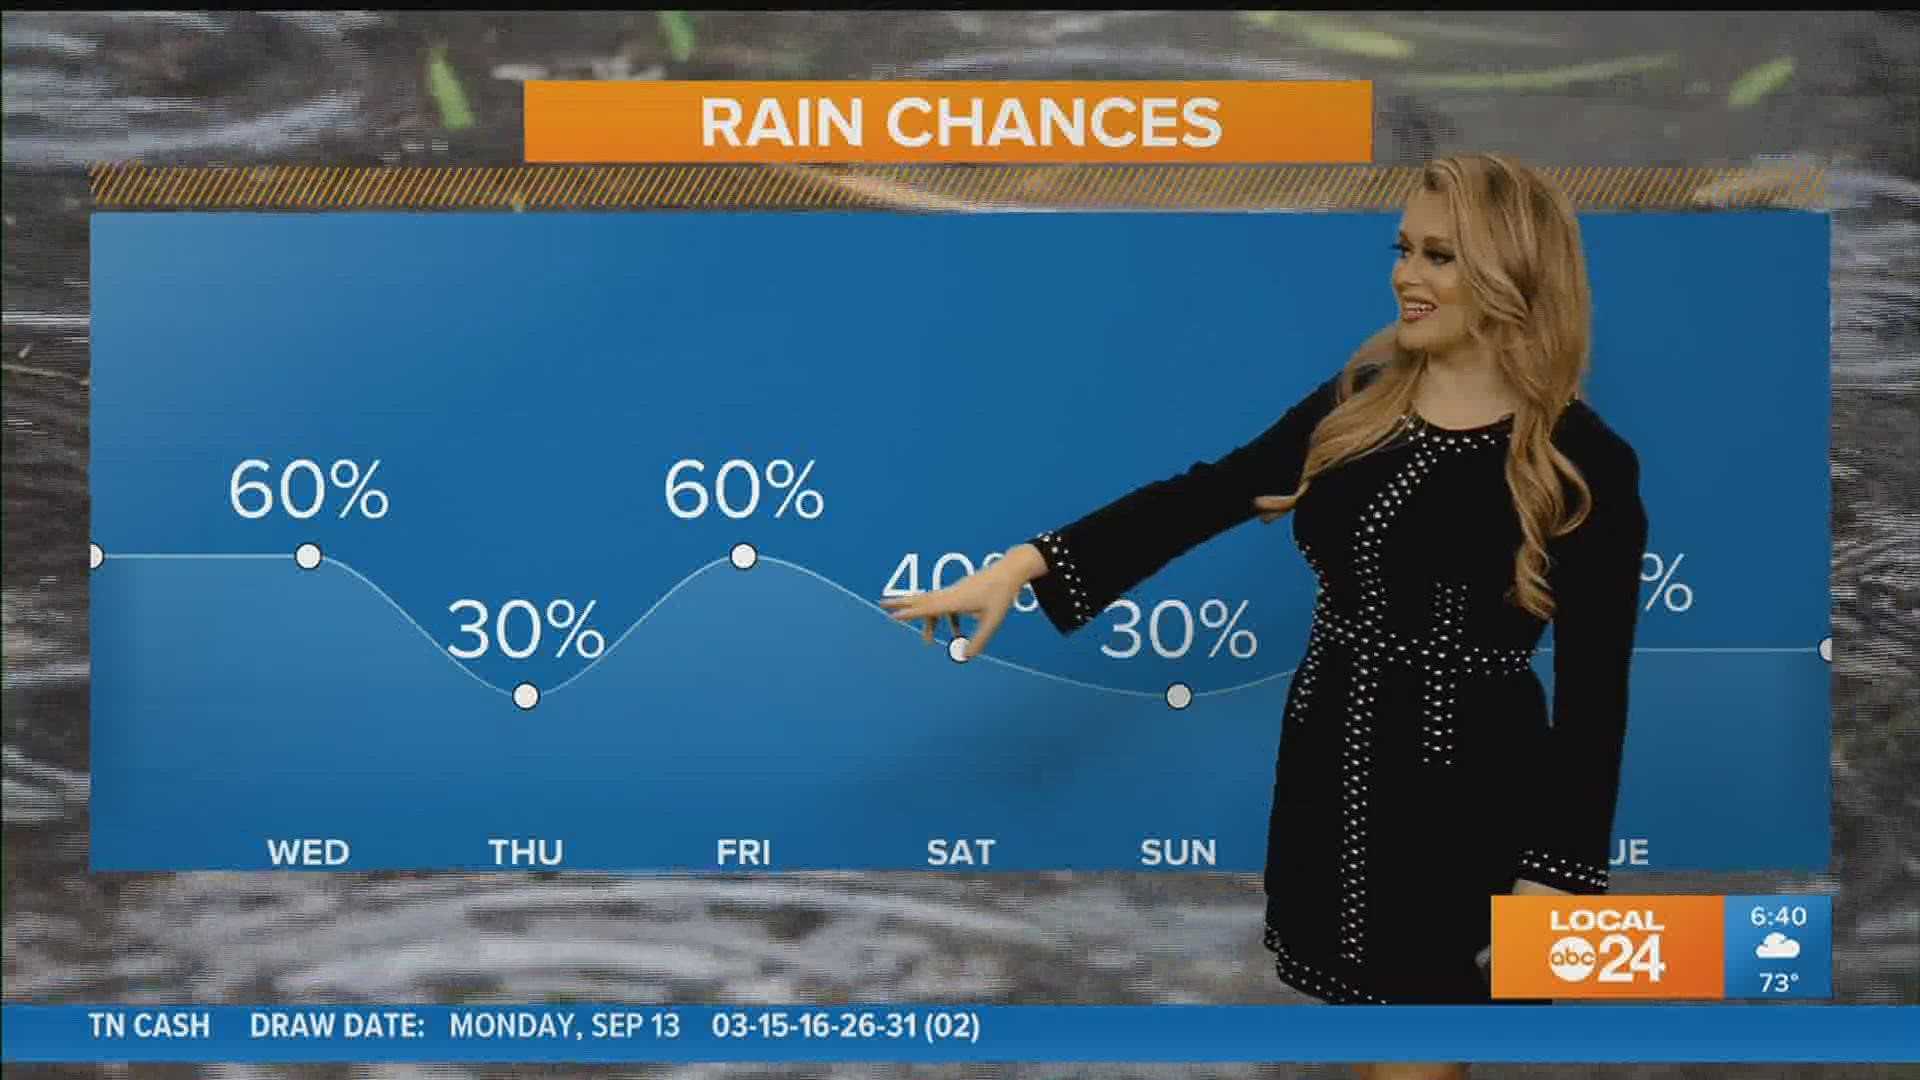 Umbrellas will be a must as heavy rainfall and flooding are possible